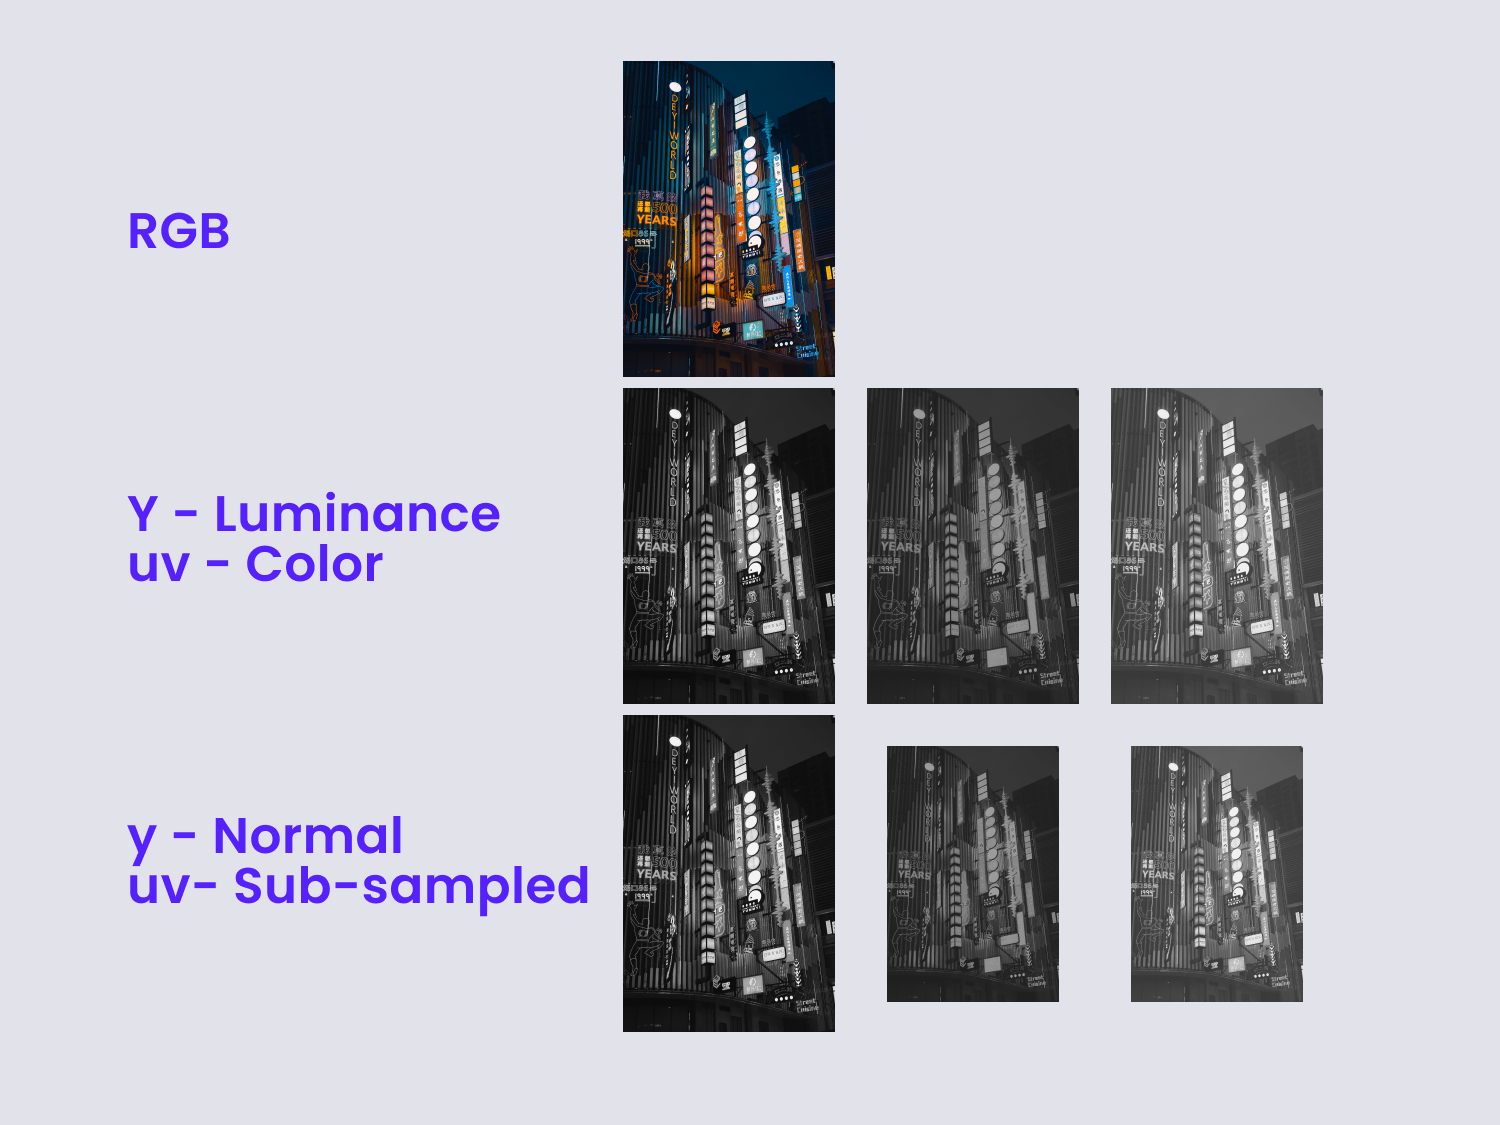 a comparison between a full RGB image, a YCbCr image, and a subsampled version of the YCbCr image